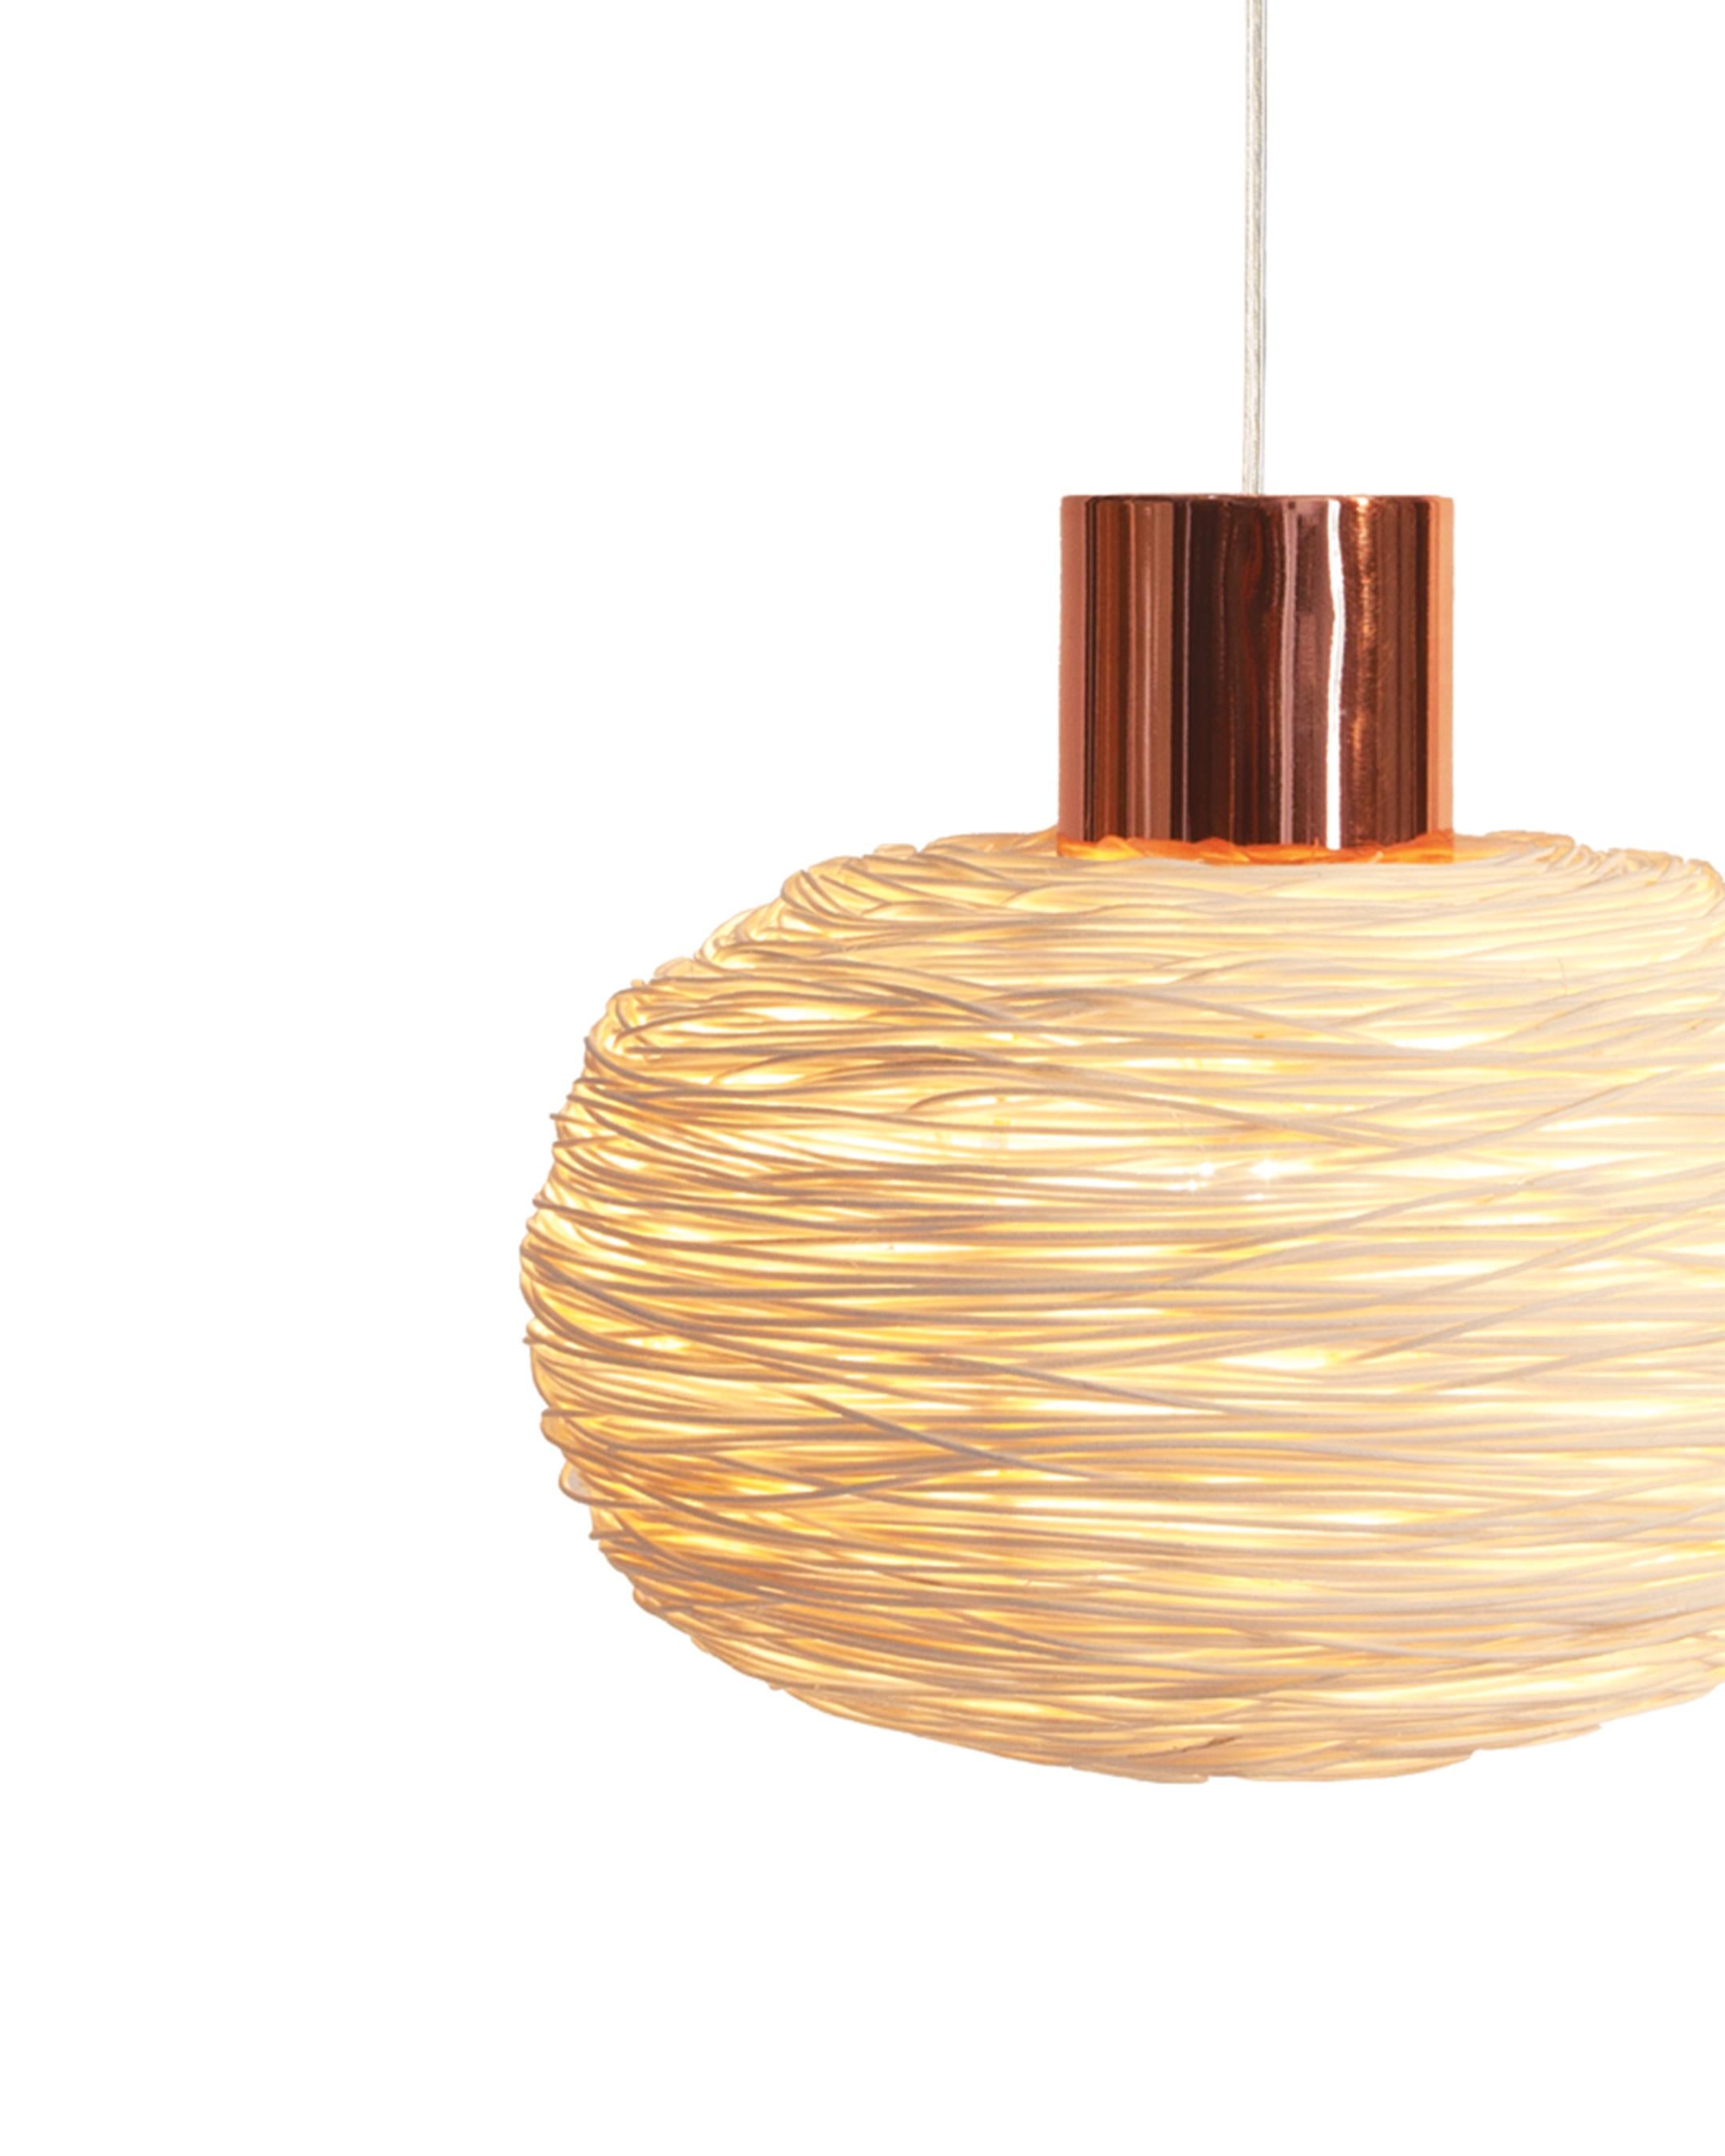 Unit Pendant-R by Ango is rattan hand-weaving pendant lights.
With very fine 1 mm. rattan hand-woven to ceiling lights, the structure of handcrafted pendant light Unit Pendant-R evokes a flattened sphere or mini world, then clad with around one